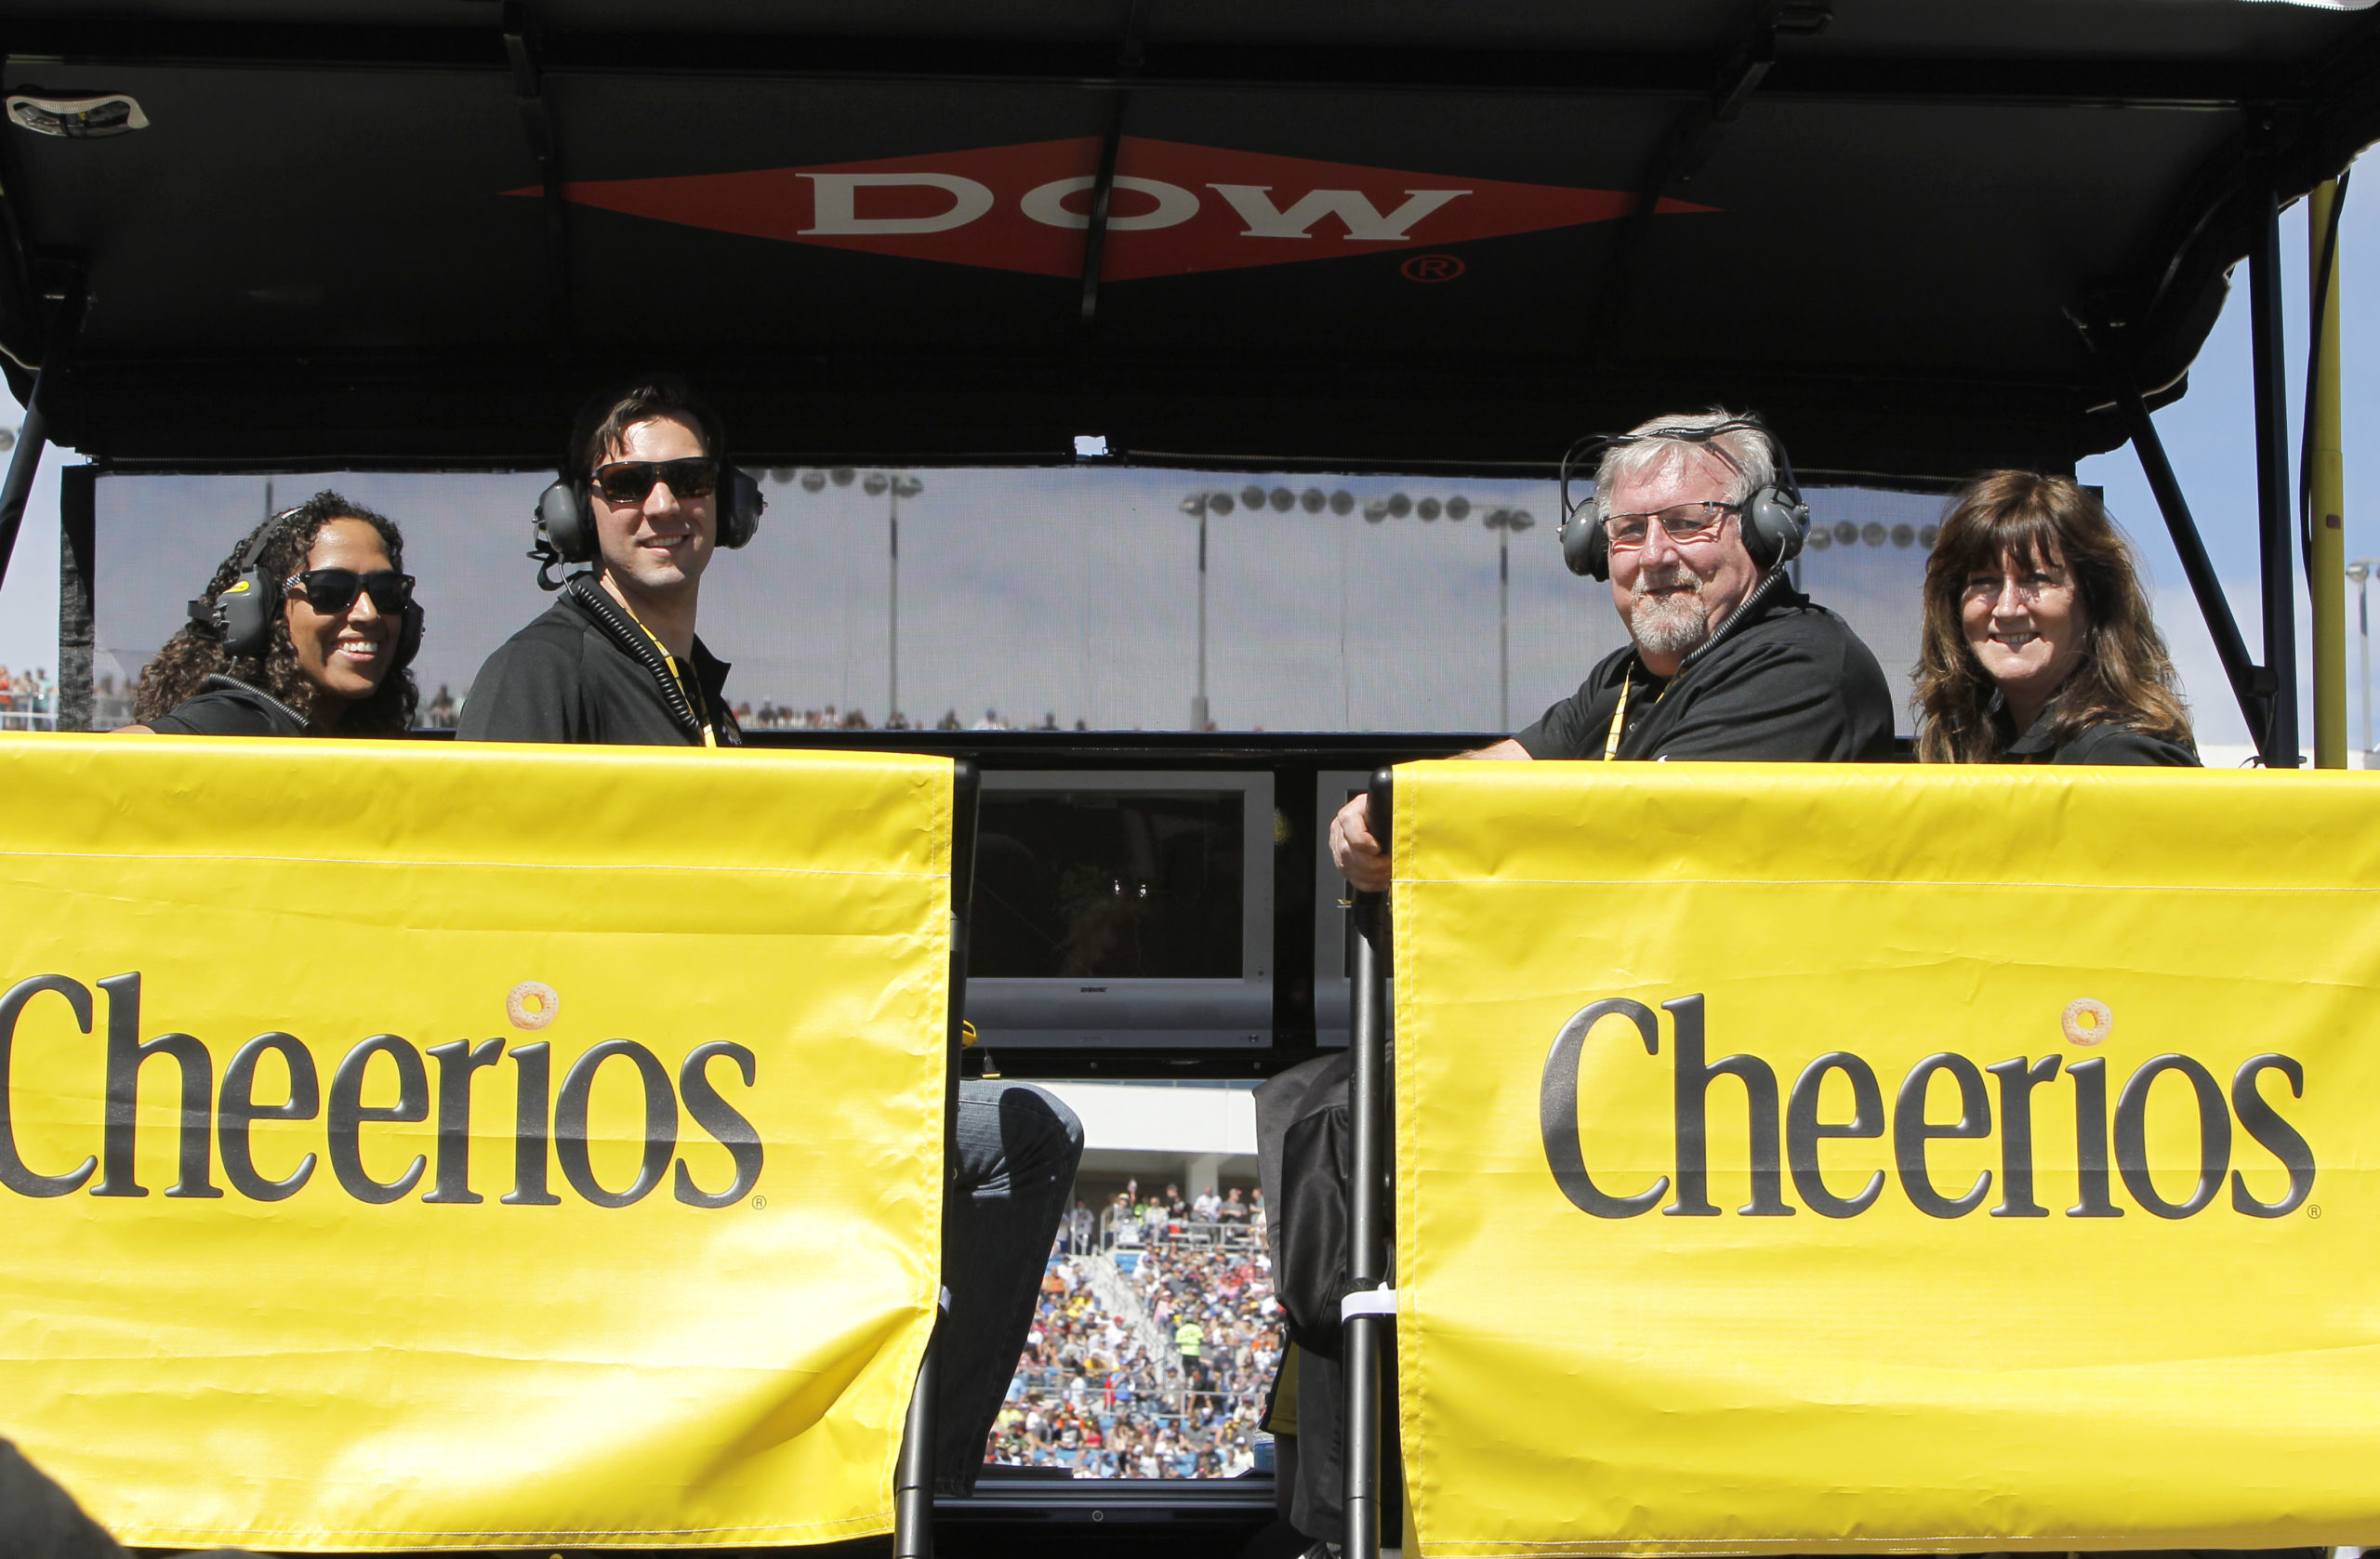 Four people sitting in a Cheerios promobile